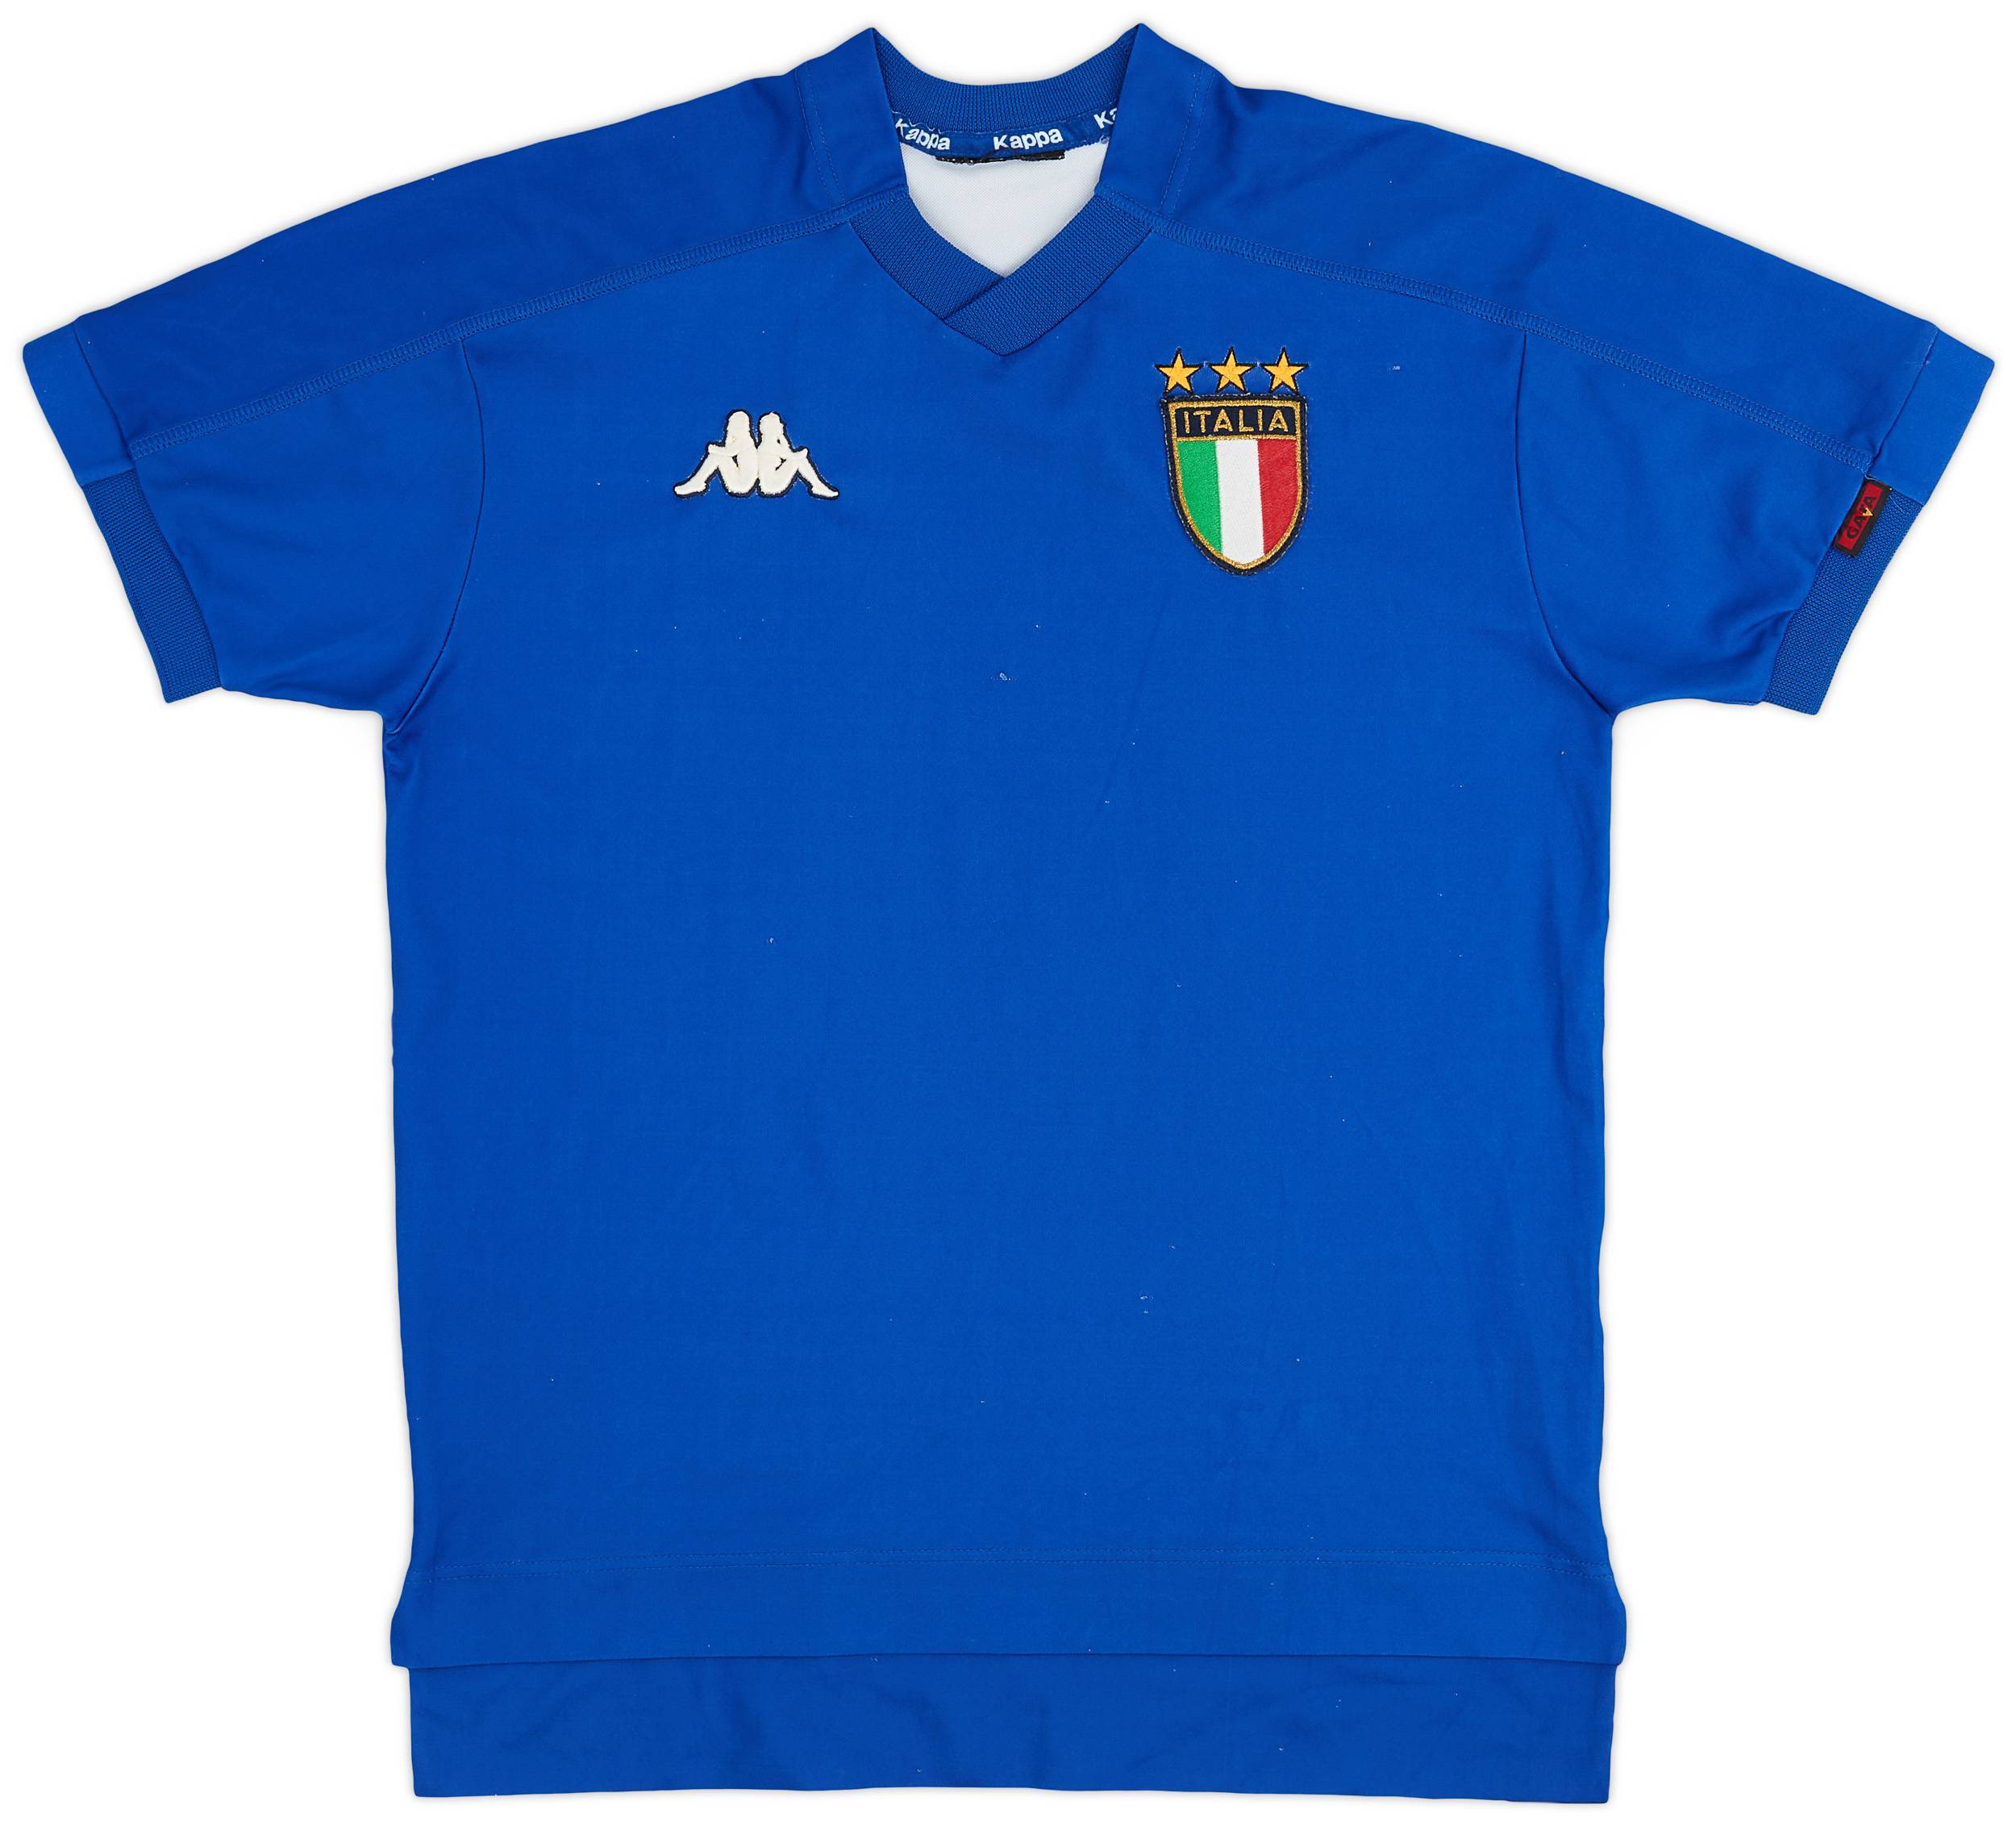 1998-99 Italy Home Shirt - 8/10 - (S)